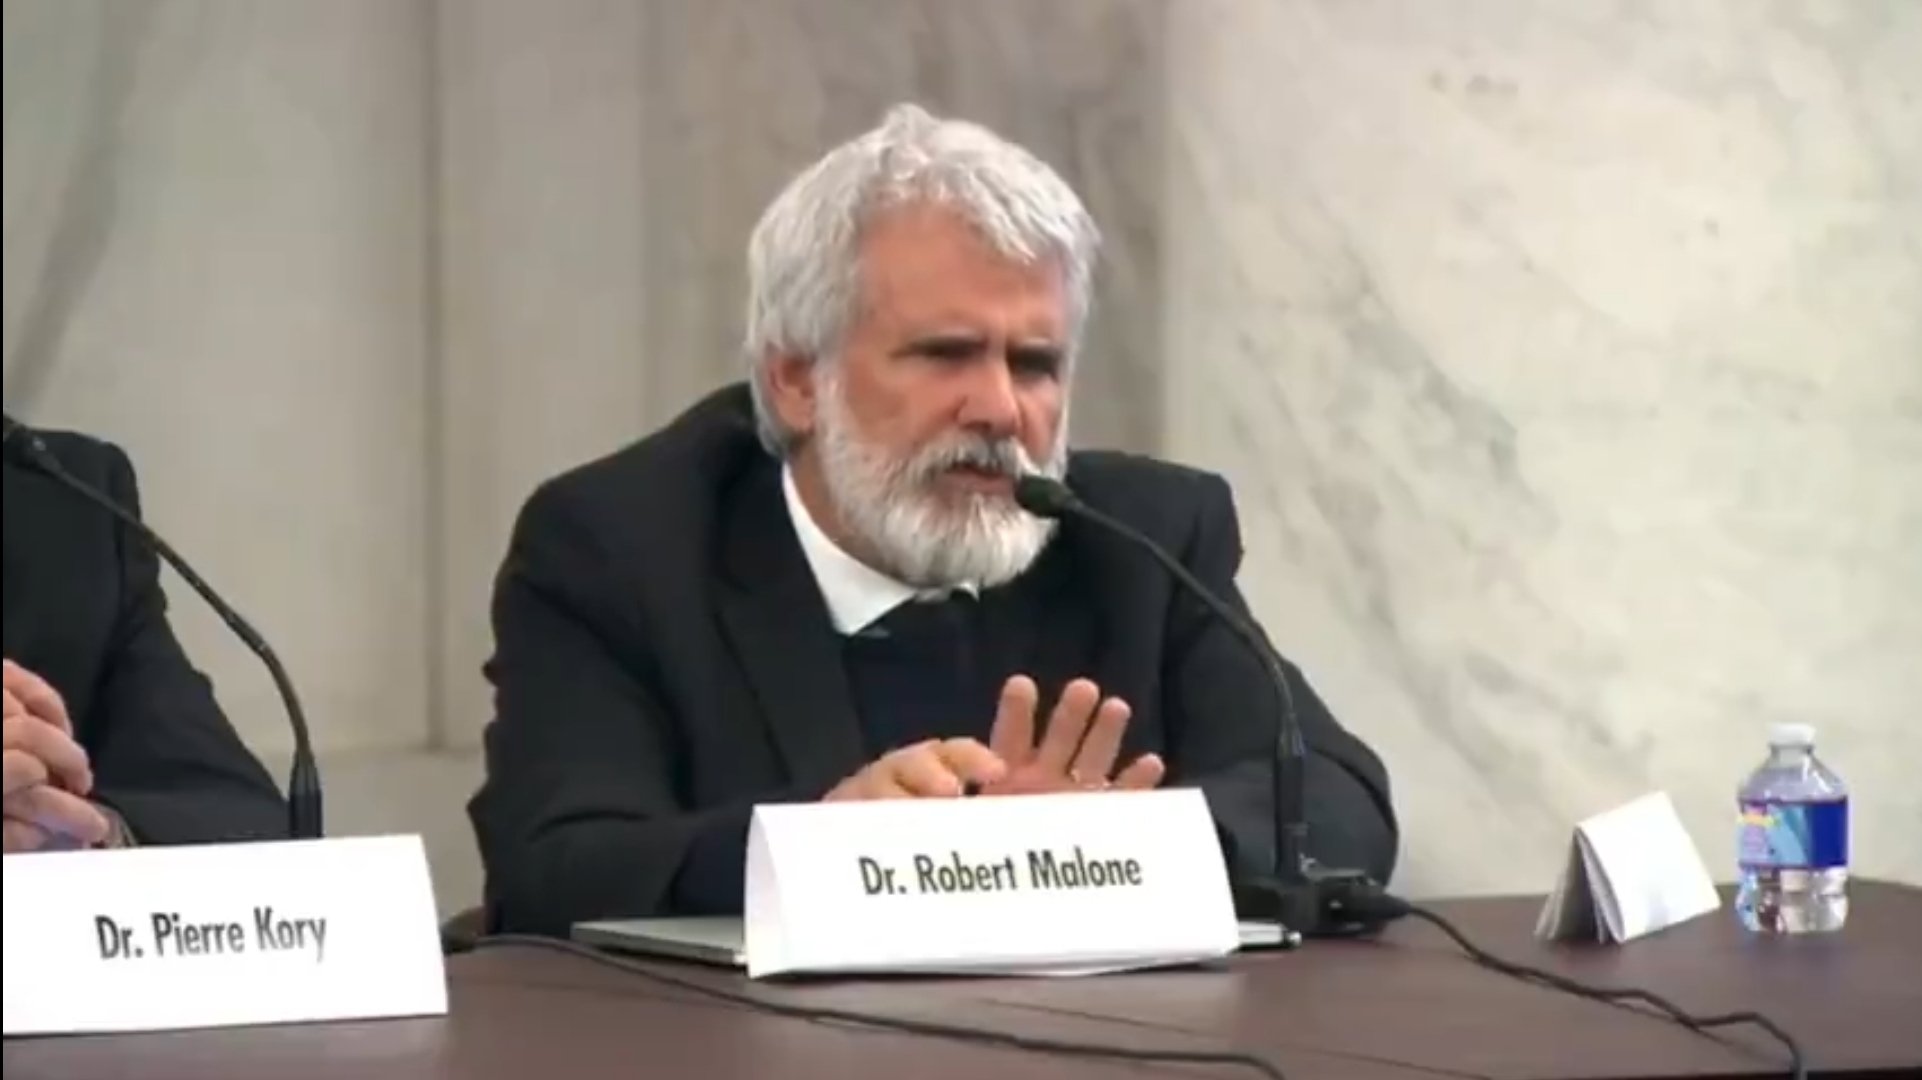  “Omicron Transmission is Likely Facilitated by The Vaccines”: Dr. Malone Warns That If We Keep Vaccinating, We Risk Developing a More “Pathogenic Virus” – (VIDEO)